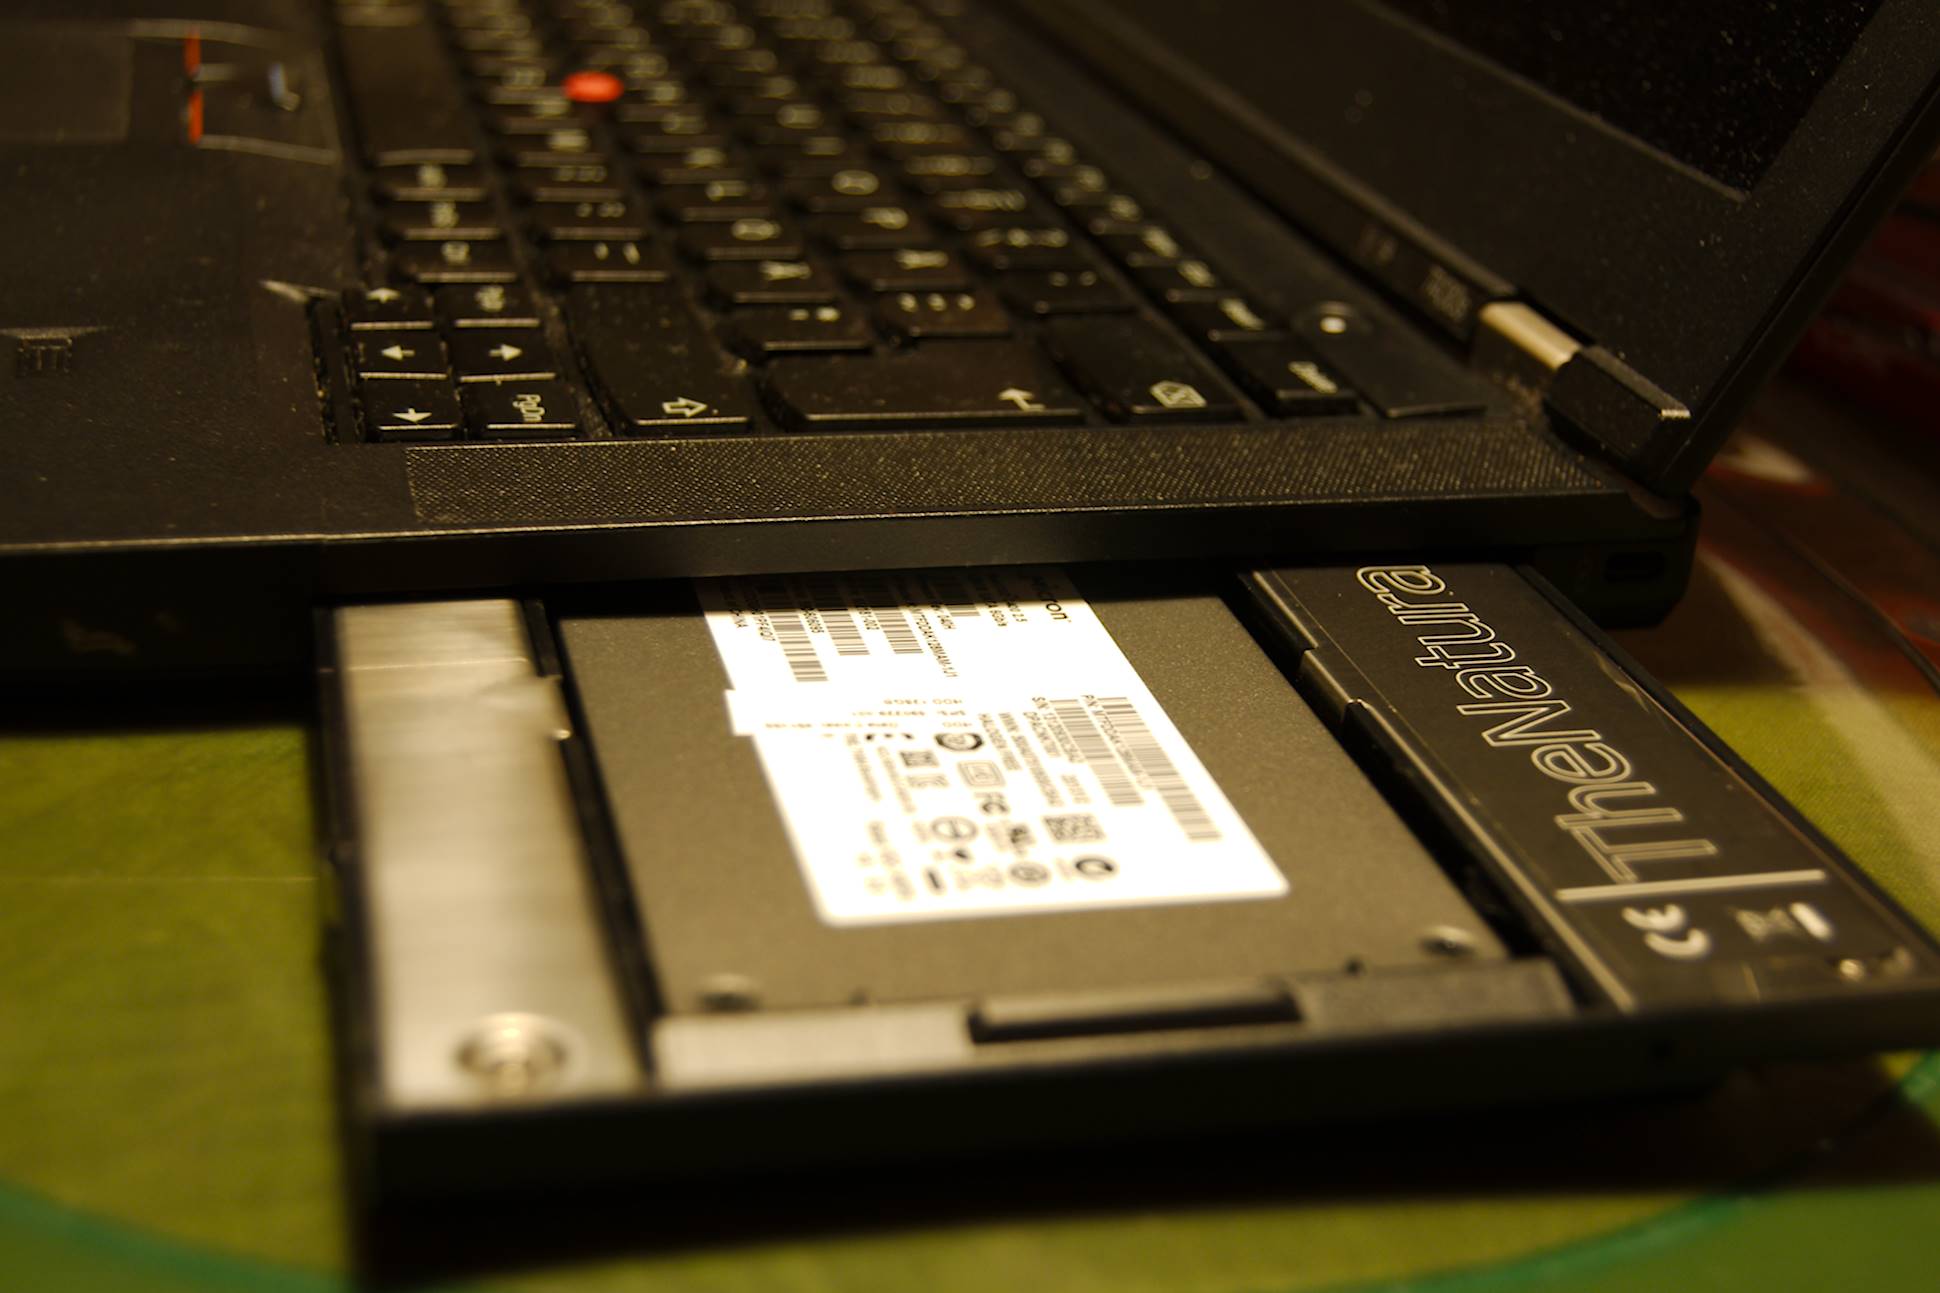 The ultrabay with the SSD halfway inserted in the slot on the Lenovo ThinkPad T430s [photo: Henrik Hemrin]